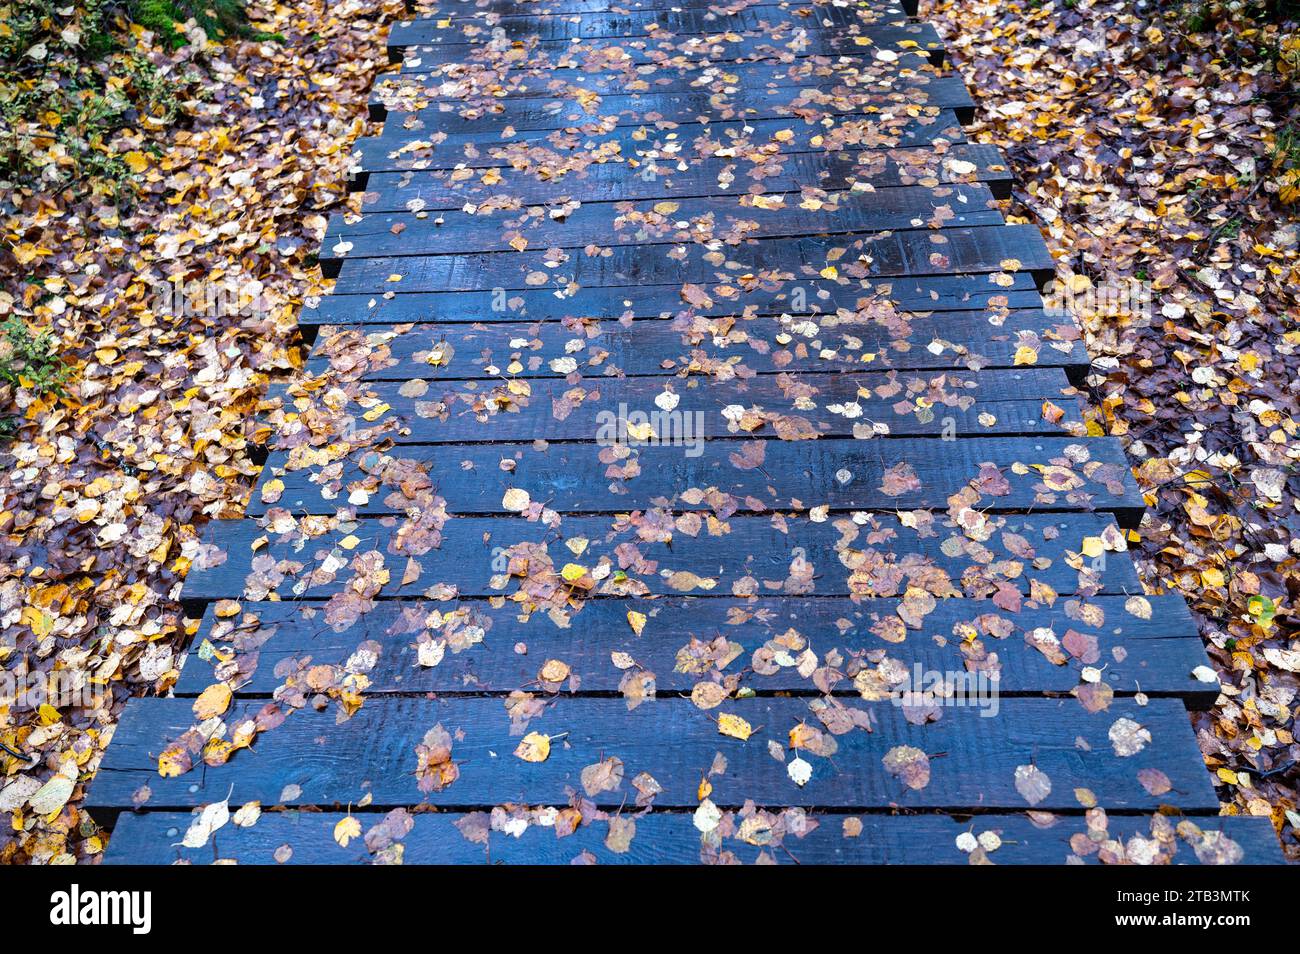 Many autumn leaves on a wet path made of wooden planks after a rain in autumn Stock Photo